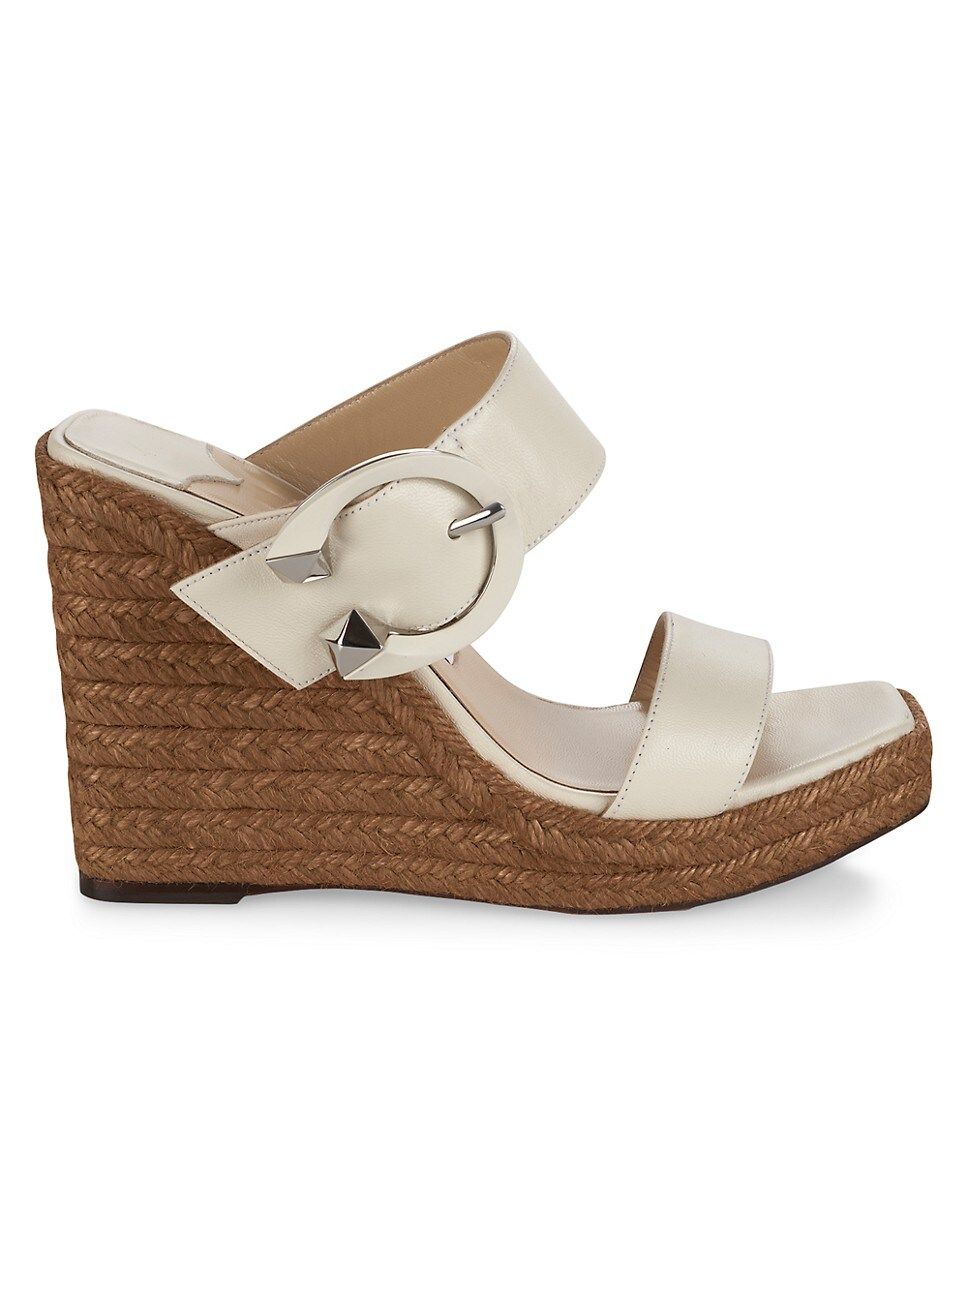 Melian 110MM Leather Wedge Sandals | Saks Fifth Avenue